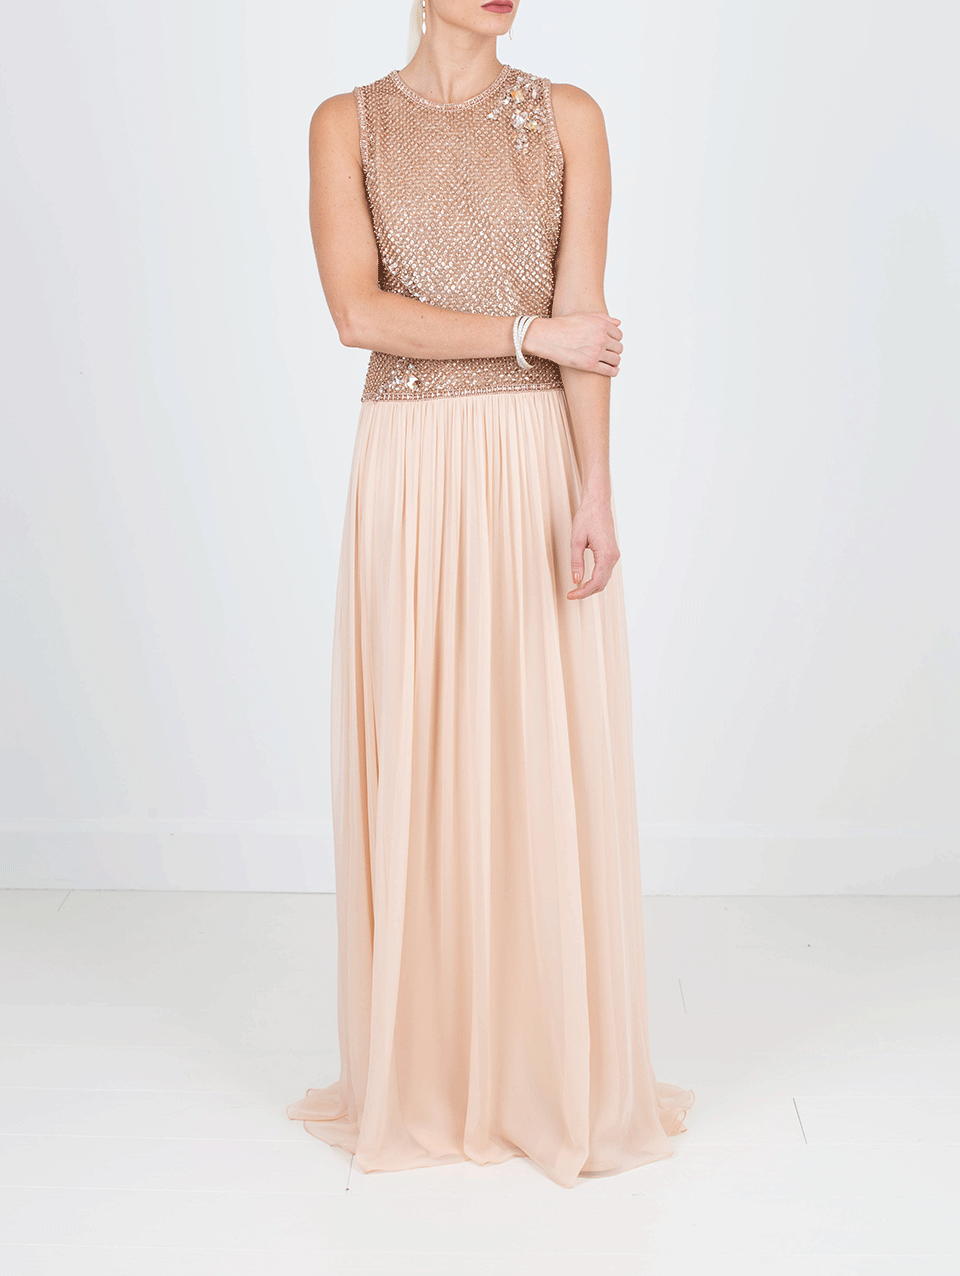 Chiffon Crystal Embroidered Gown CLOTHINGDRESSGOWN PAMELLA ROLAND   